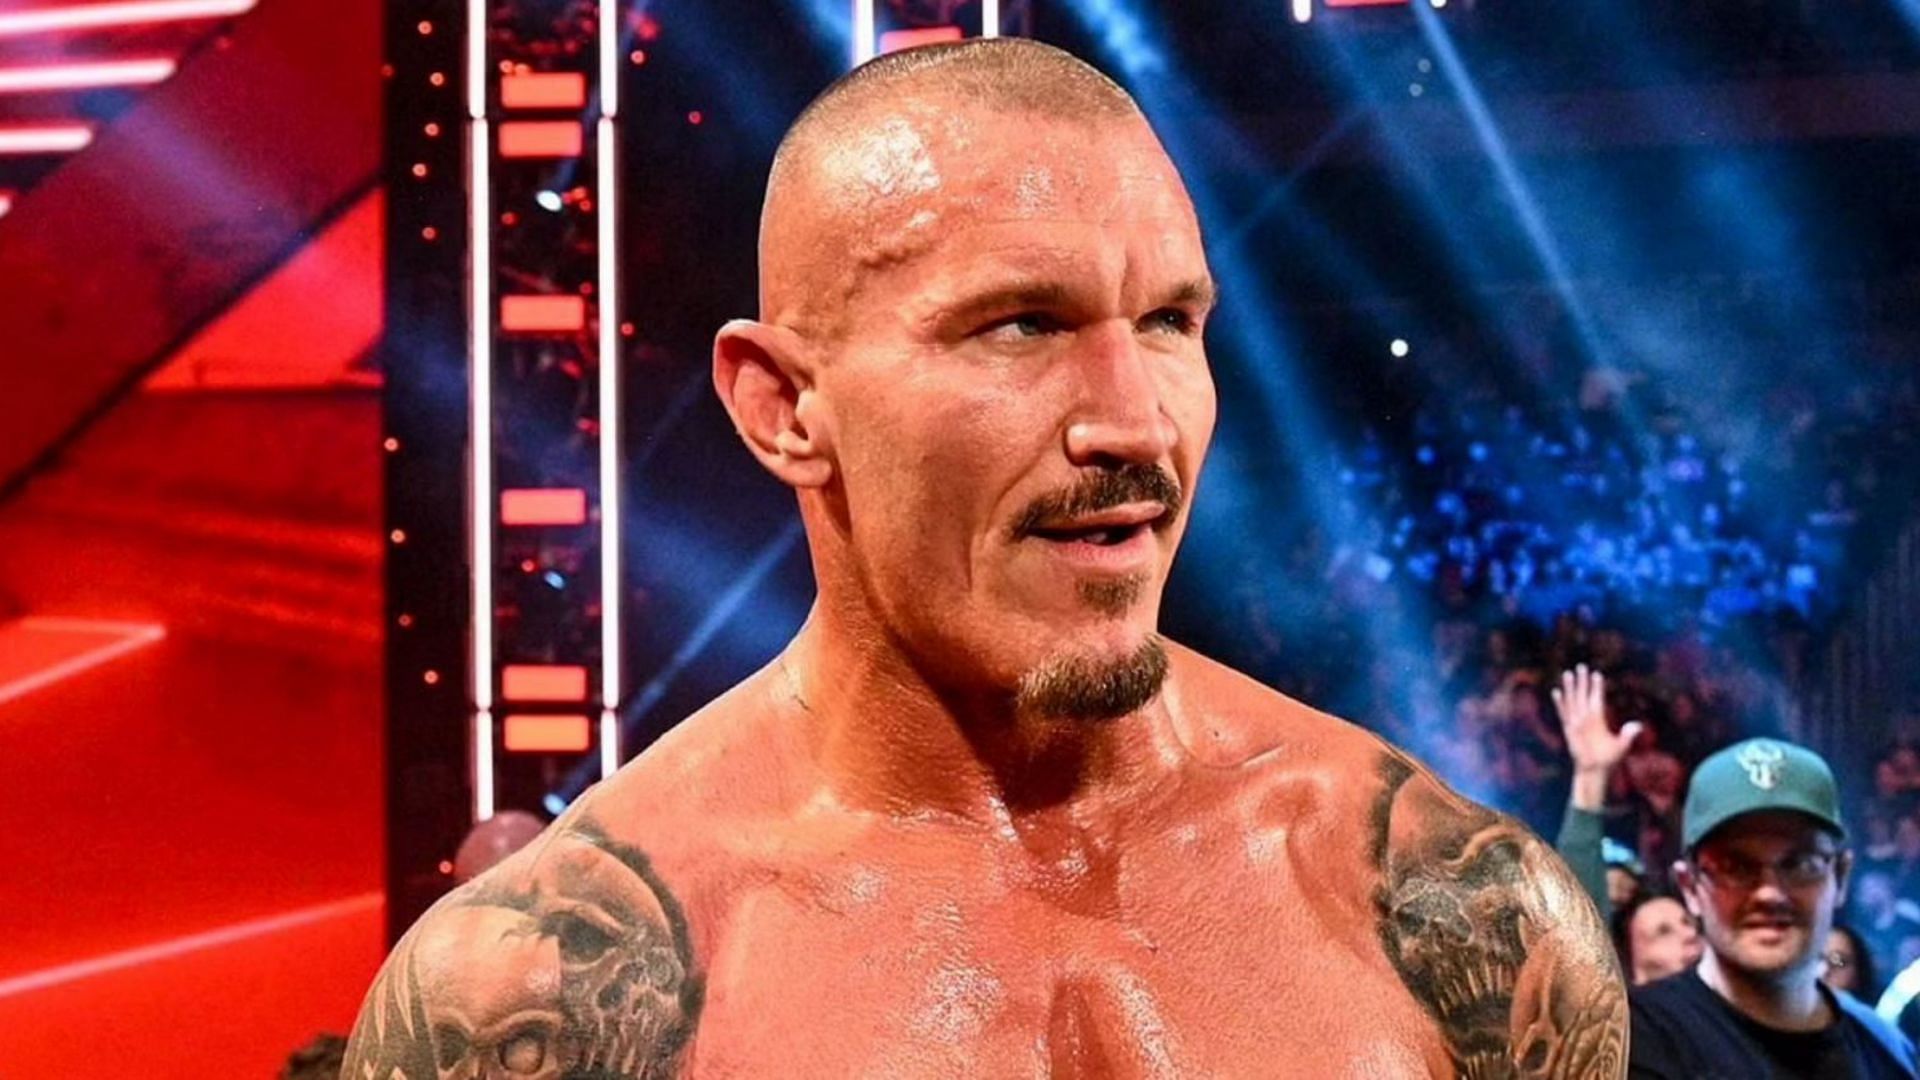 Randy Orton has been absent from WWE for over a year